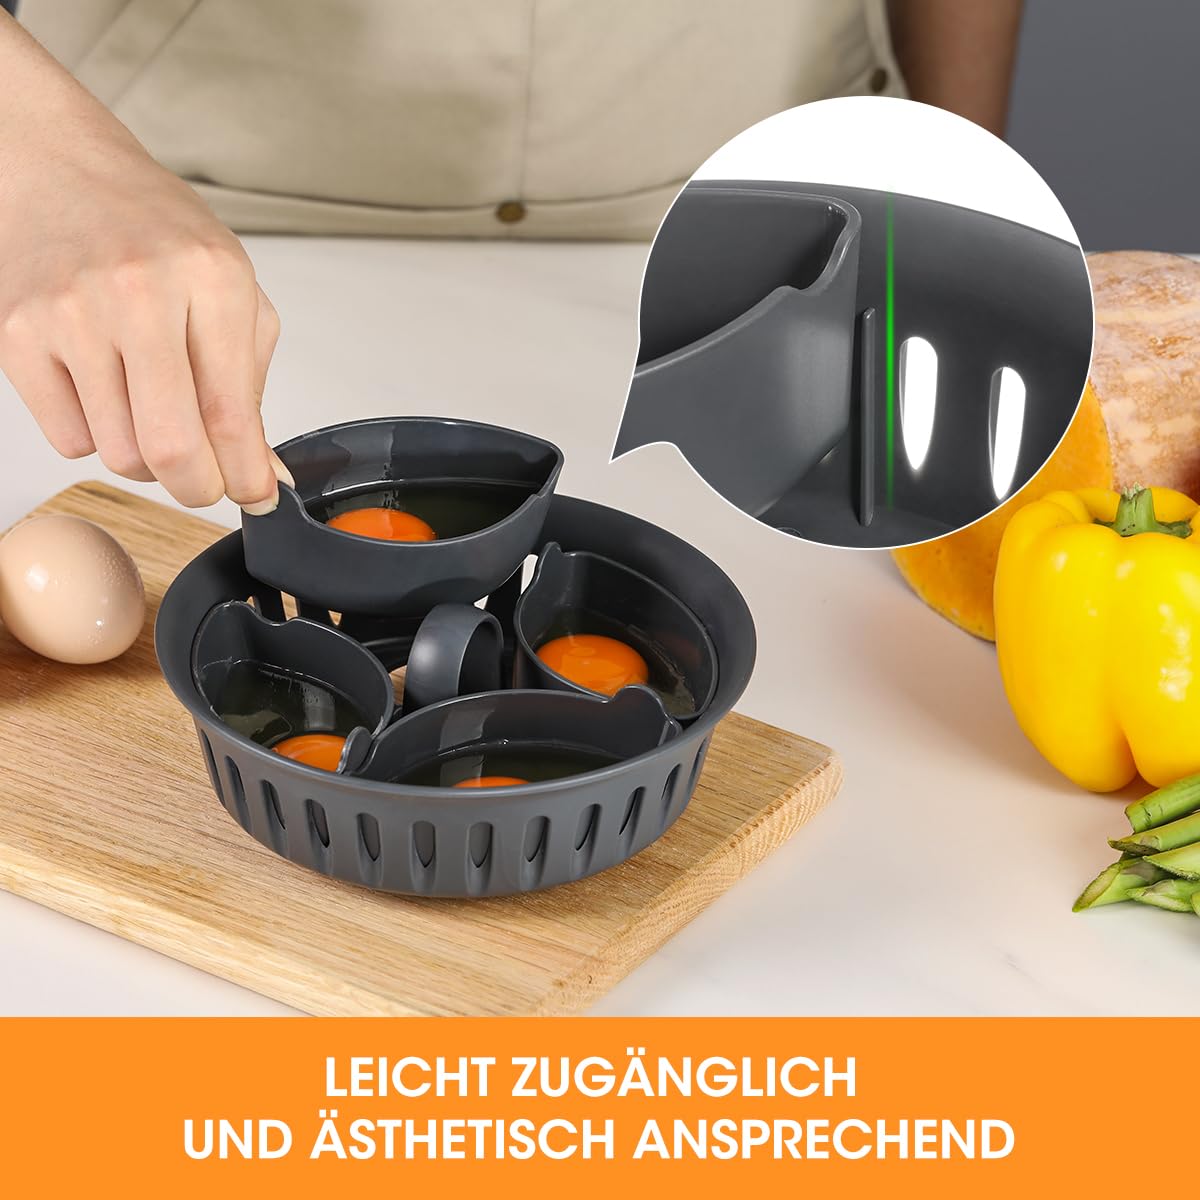 The egg cookers are made of food-grade materials with excellent heat resistance.